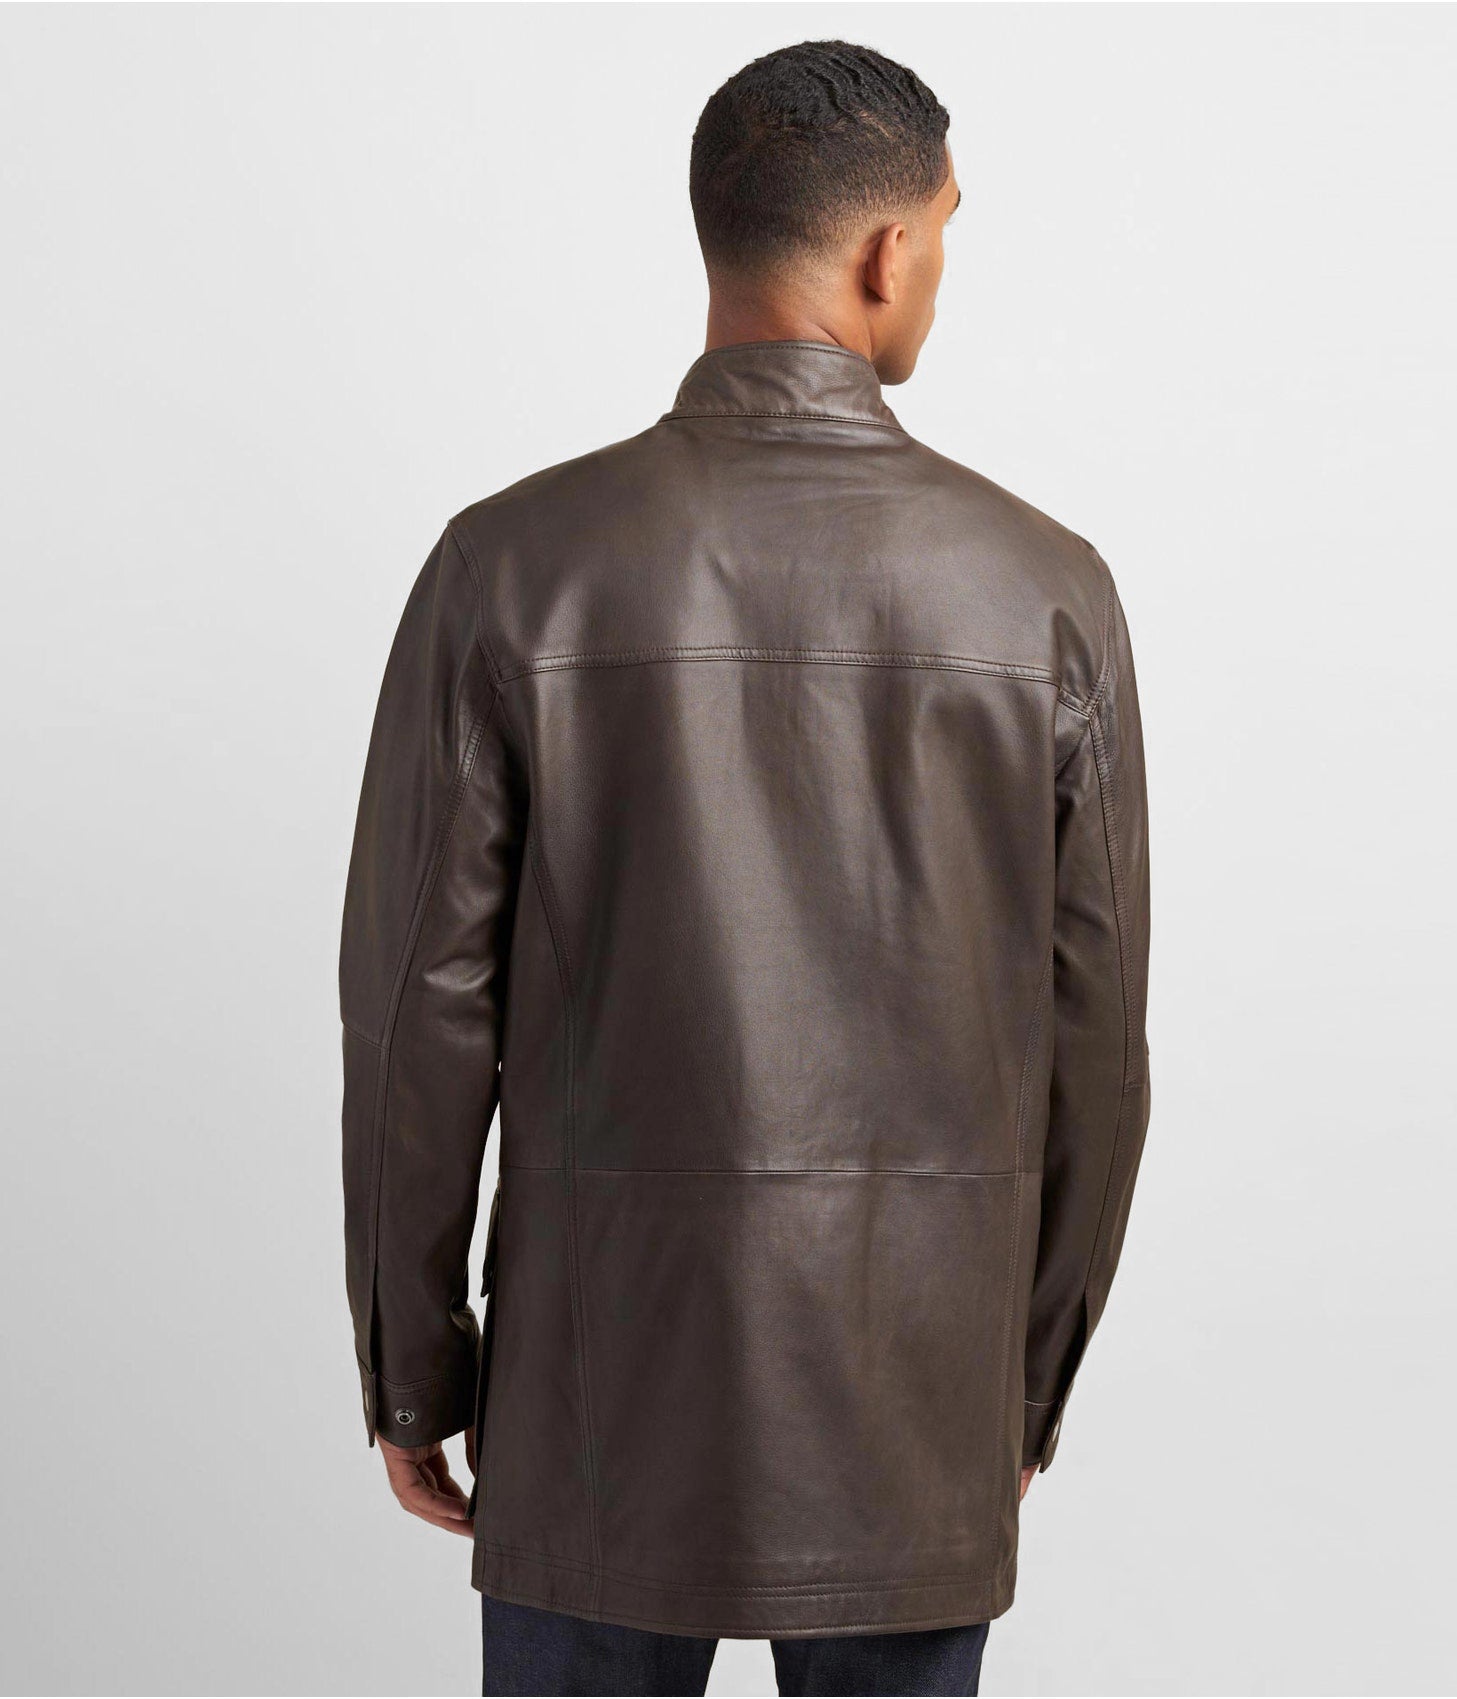 Men's Leather Coat In Dark Brown With Patch Pockets